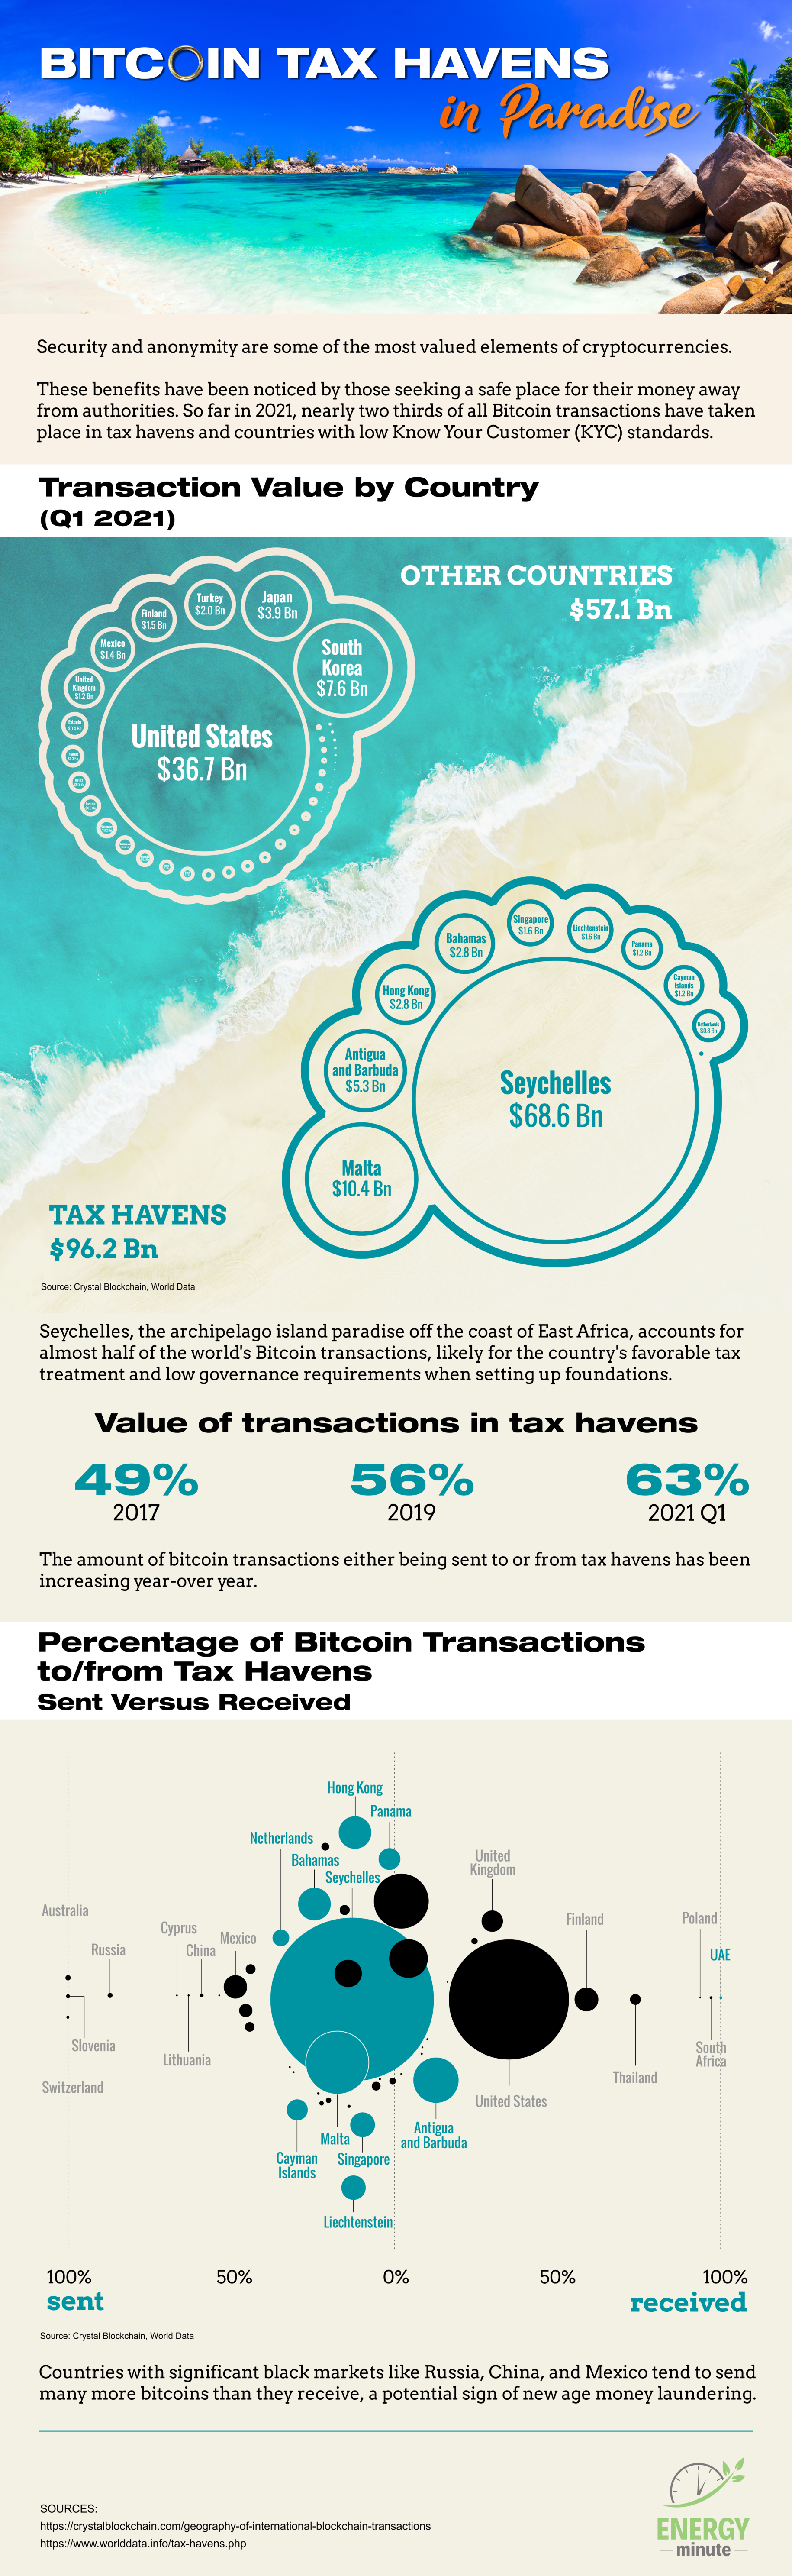 The Offshore Tax Havens Used for Bitcoin Transactions